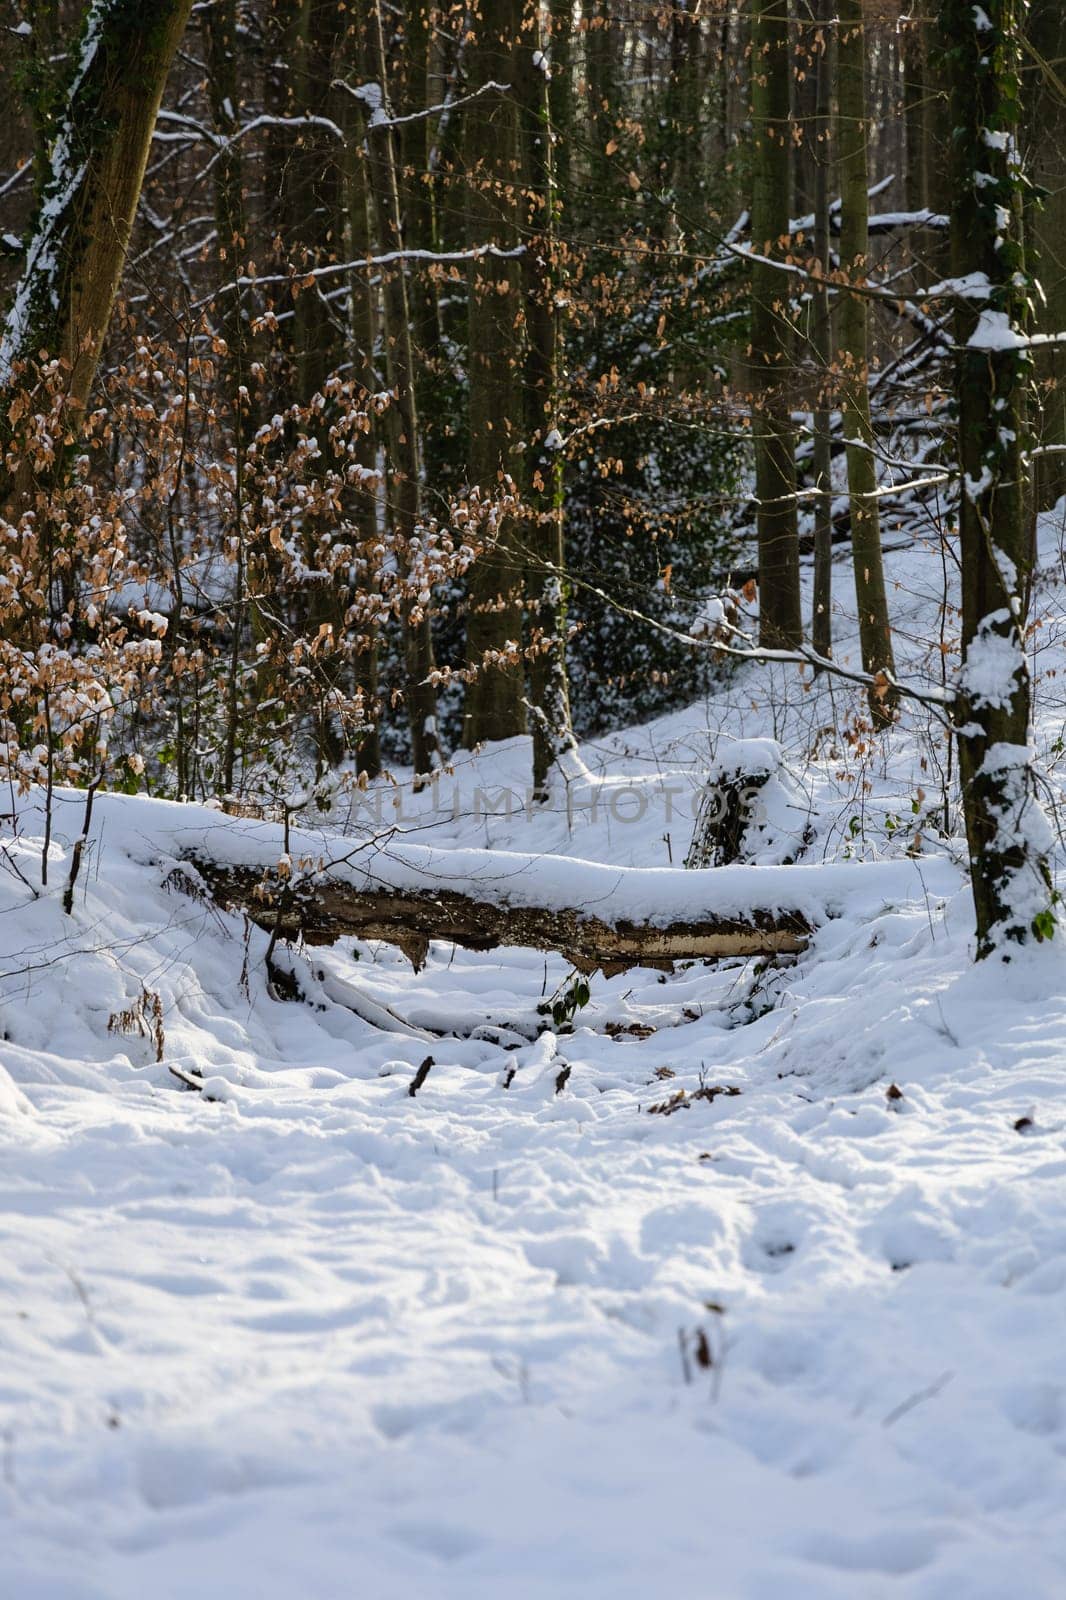 A photo of a snow-covered forest with a bench situated in the center, surrounded by trees and a white winter landscape.